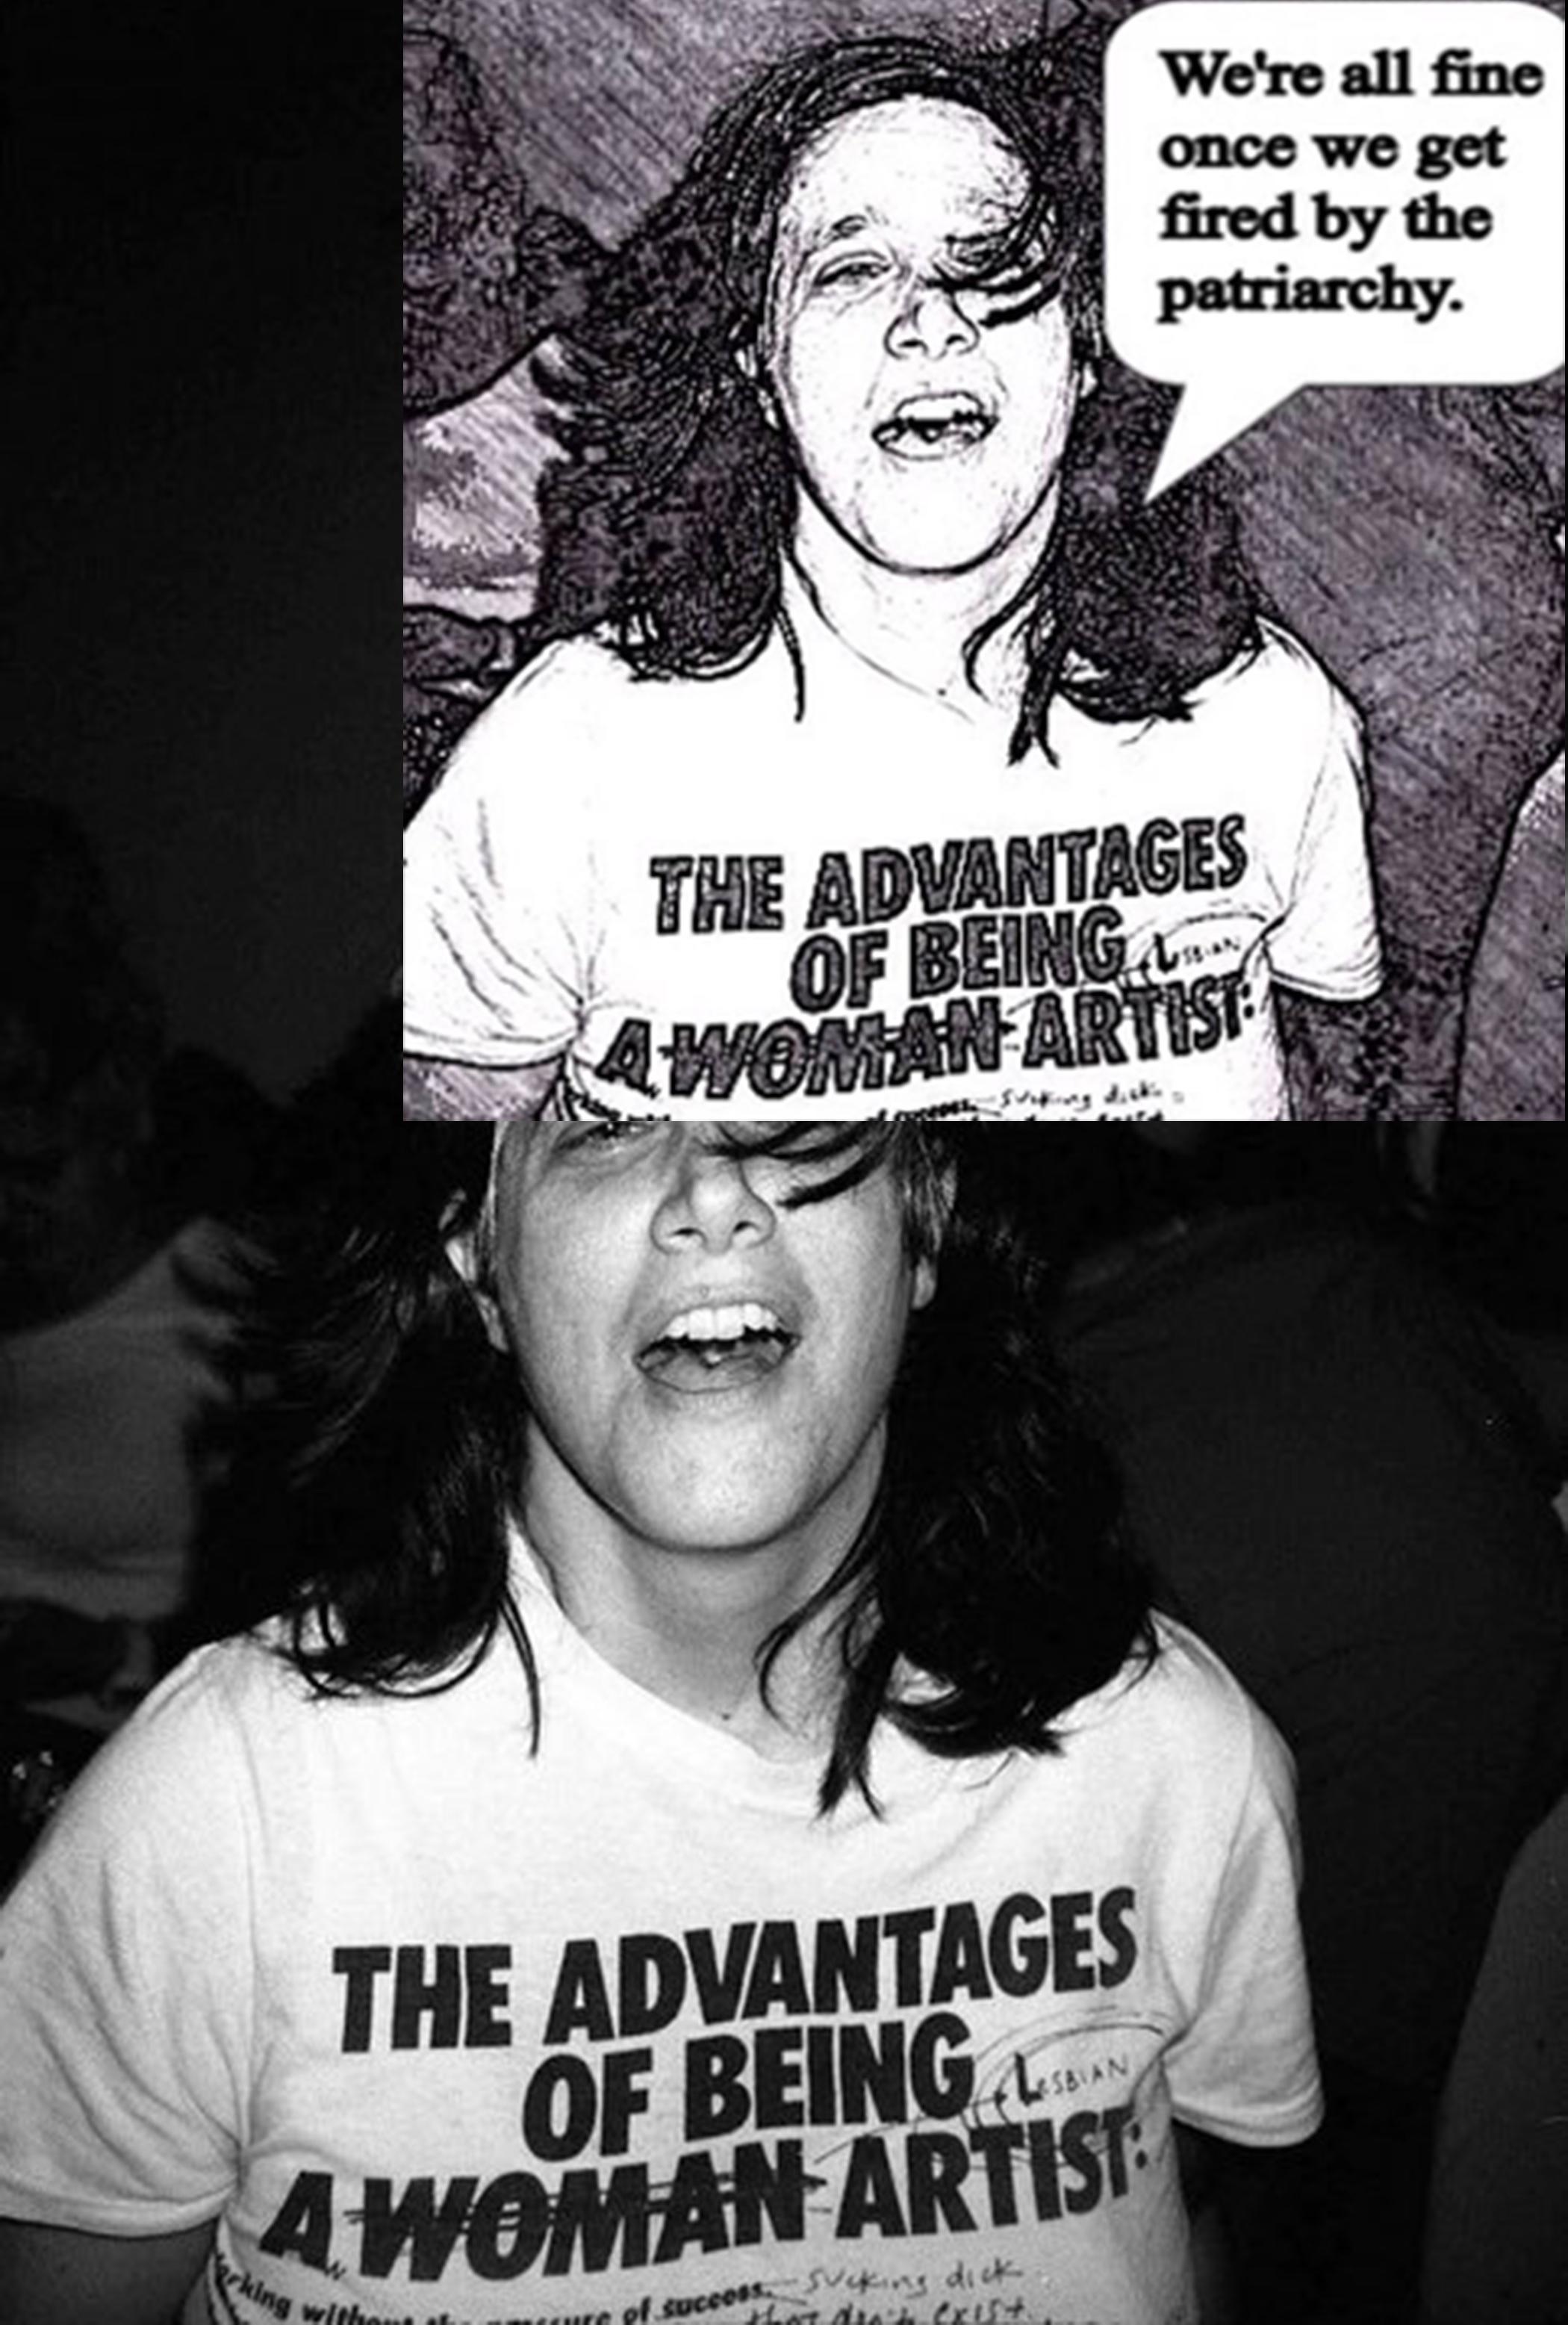 A black-and-white photograph of a woman wearing a T-shirt that says "THE ADVANTAGES OF BEING A WOMAN ARTIST" is overlaid by a drawing of the photo with a text bubble that reads: "We're all fine once we get fired by the patriarchy." The woman's T-shirt has a hand-drawn line through "WOMAN" and the word "LESBIAN" written above it and circled.